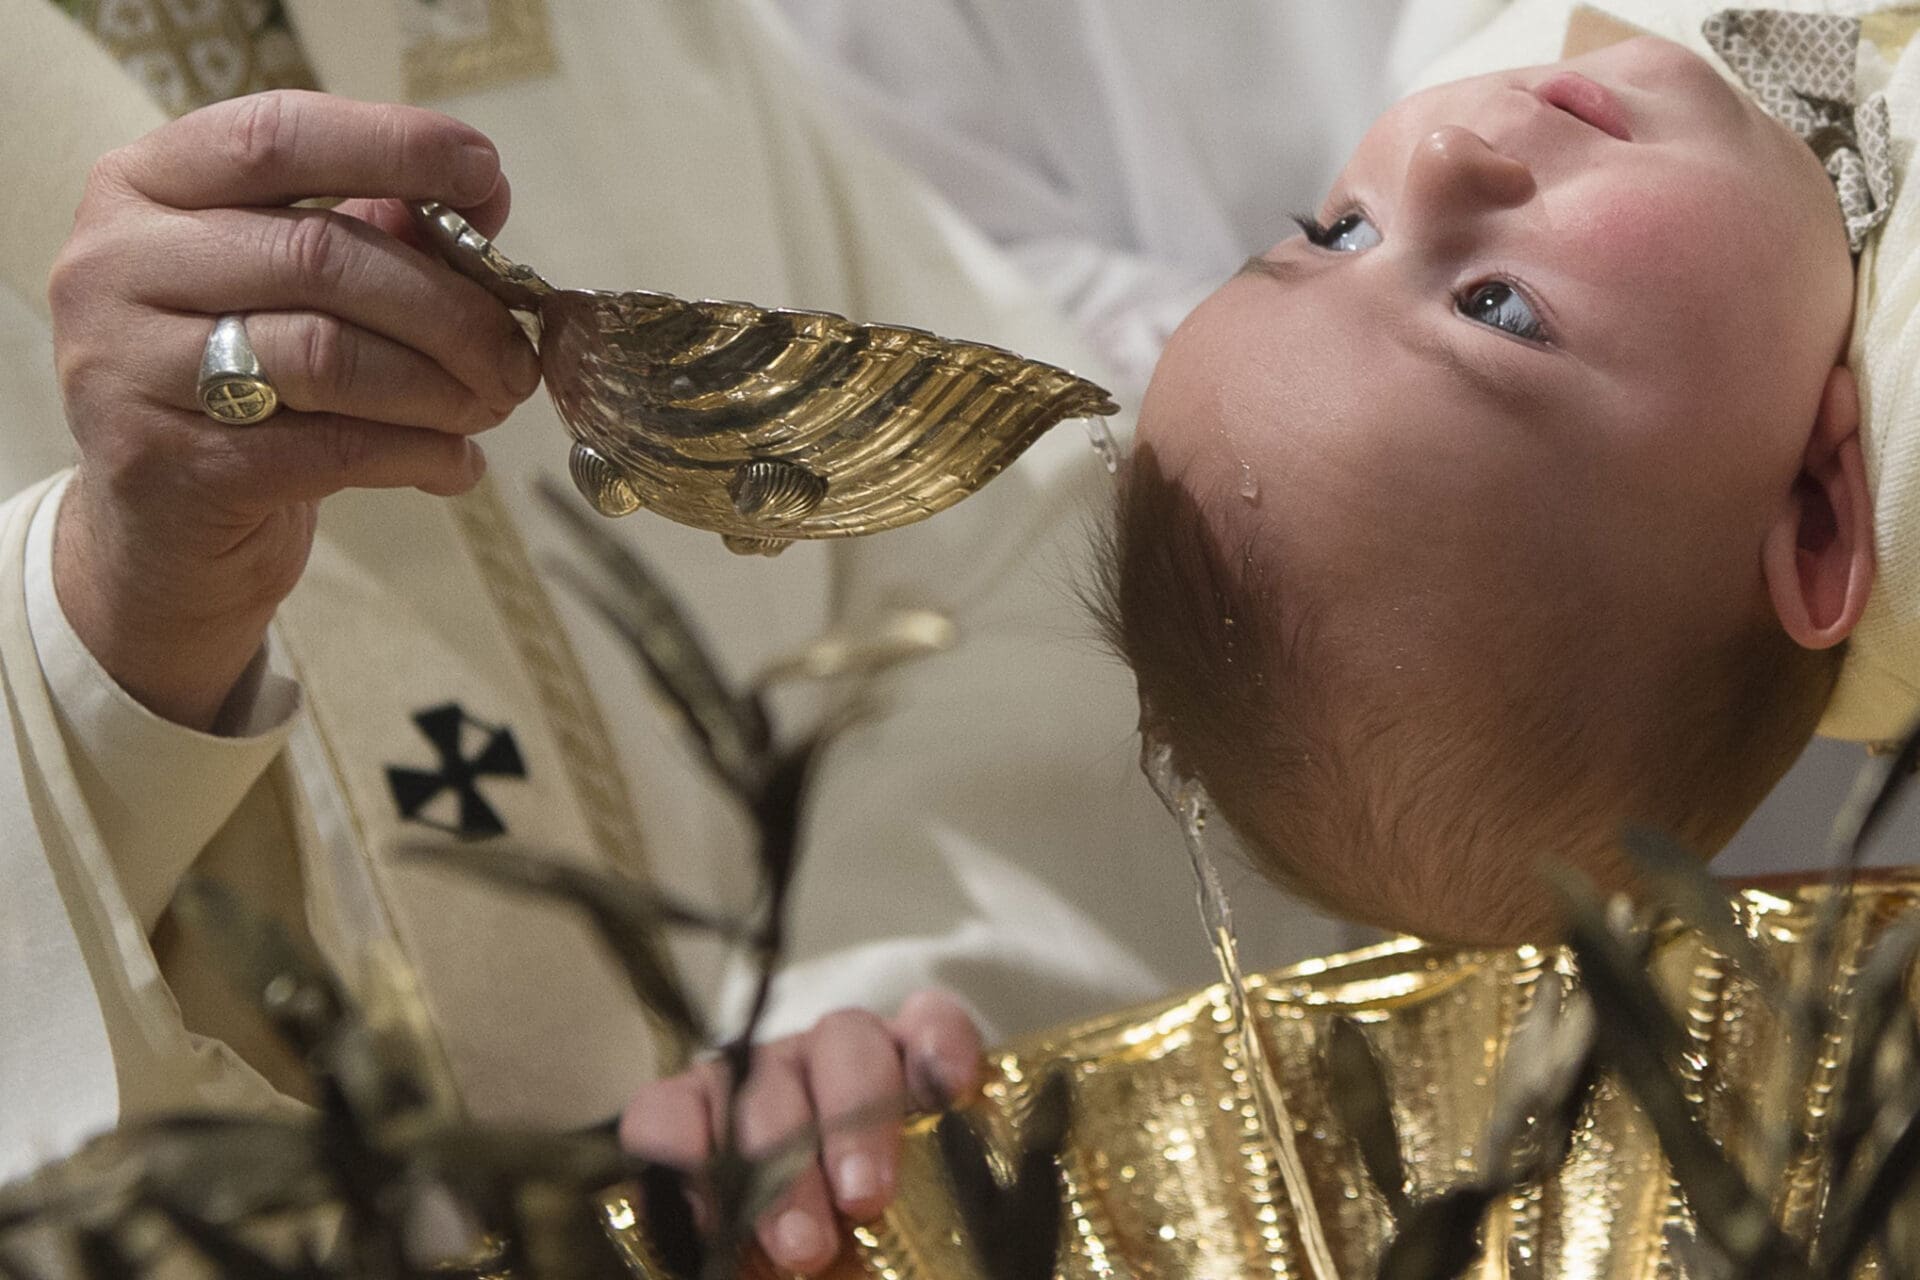 An “Unwelcome” Change? Reflections on the New Translation of the Order of Baptism of Children